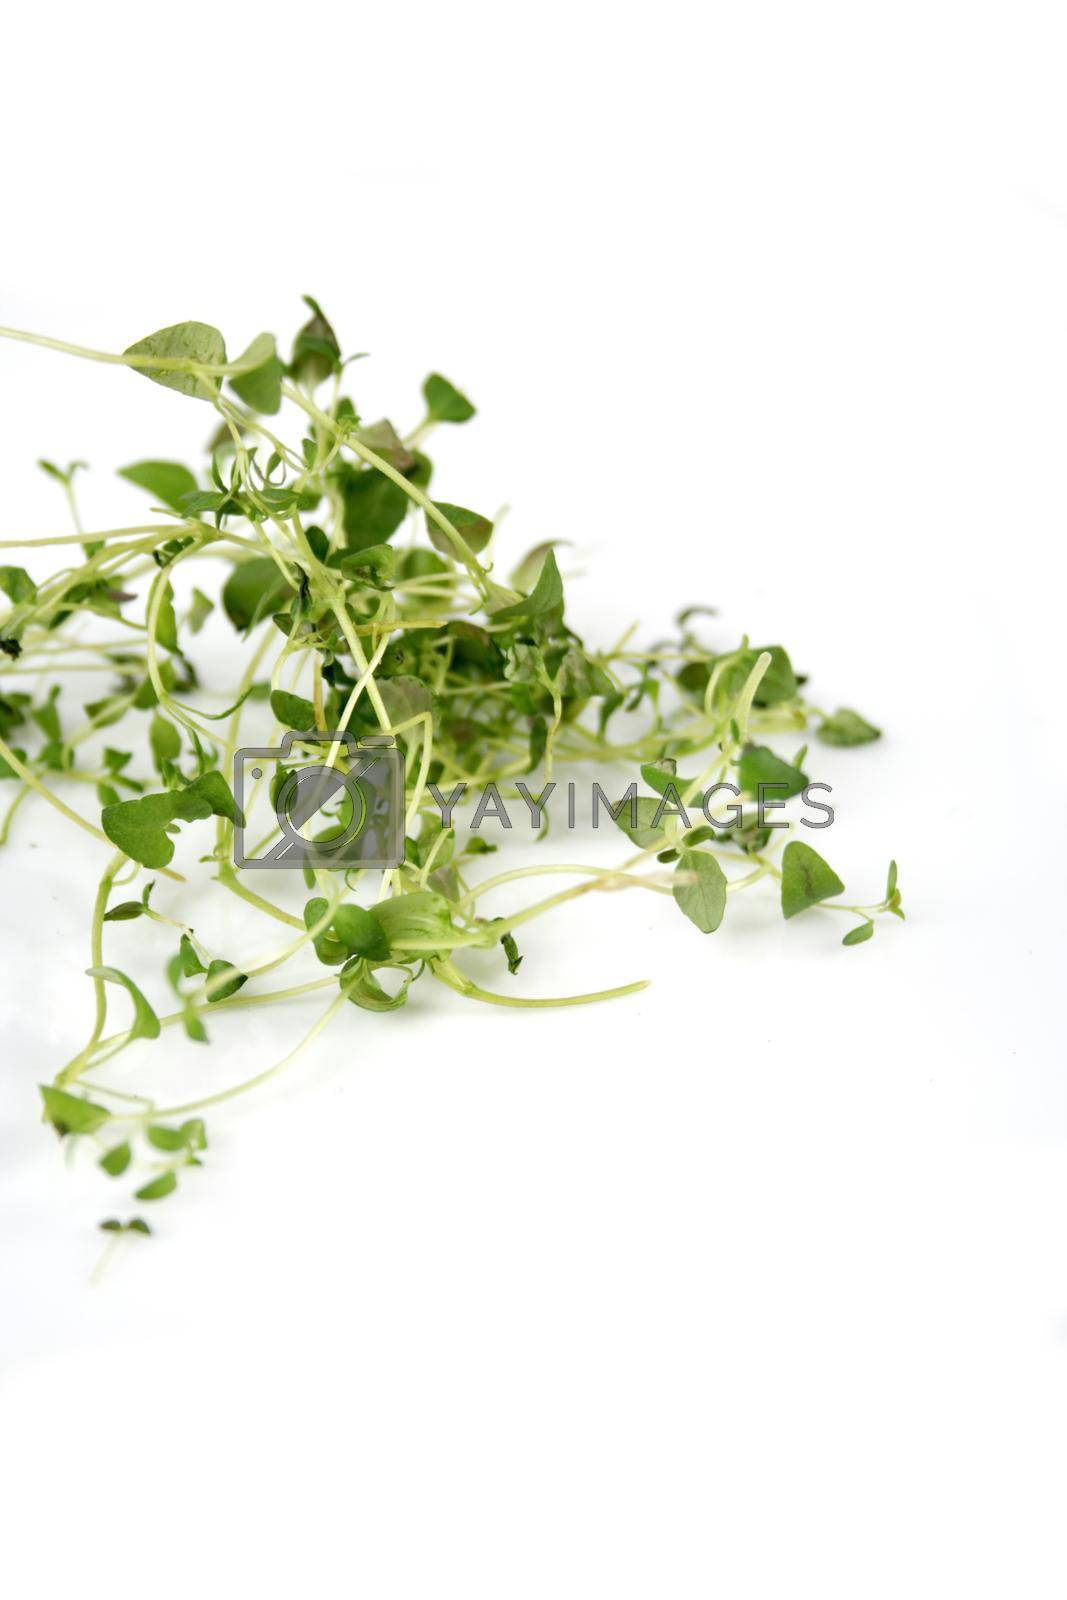 Royalty free image of Fresh thyme by moodboard